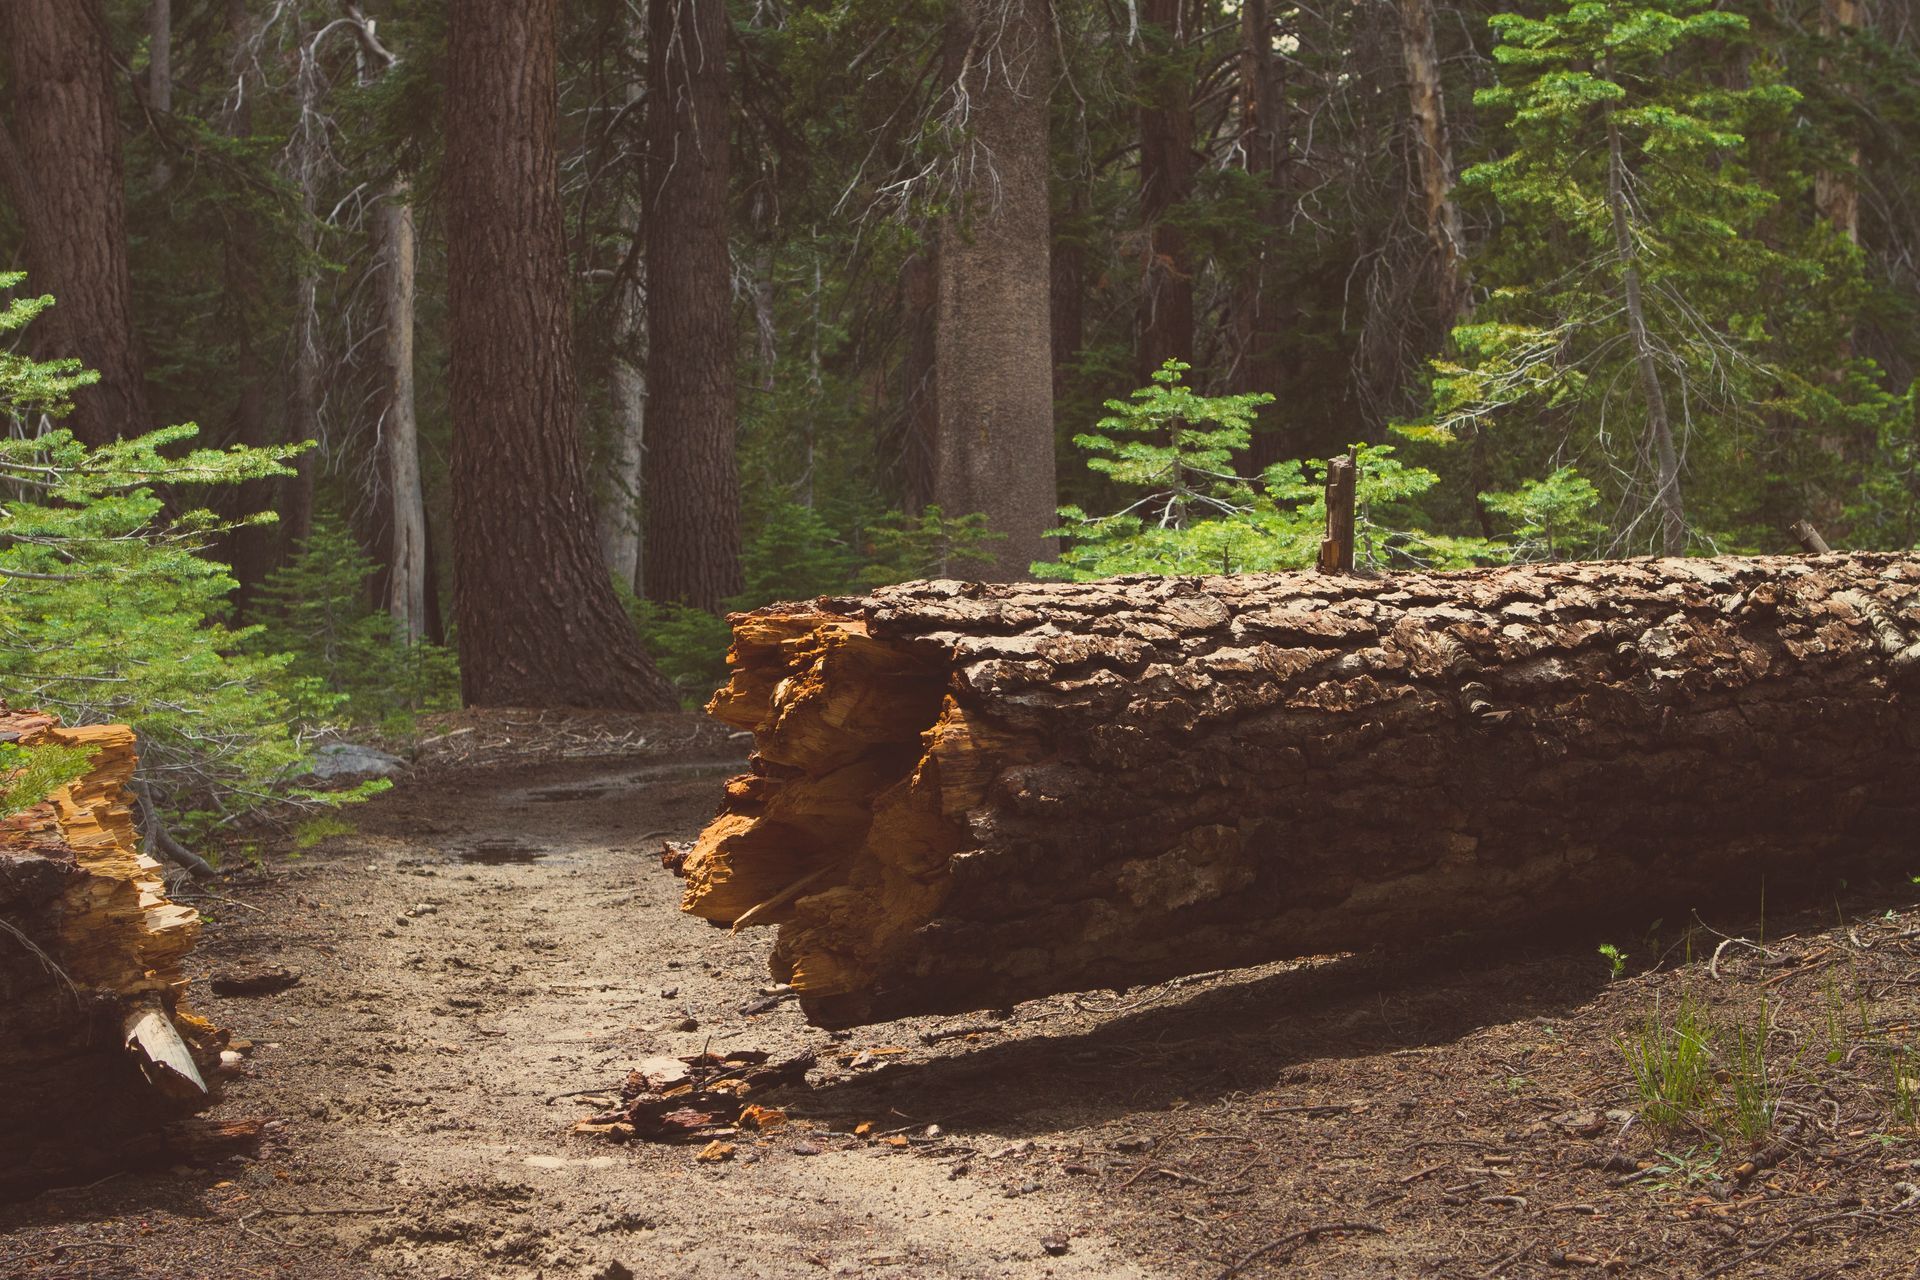 A tree fallen over after storm in a forrest